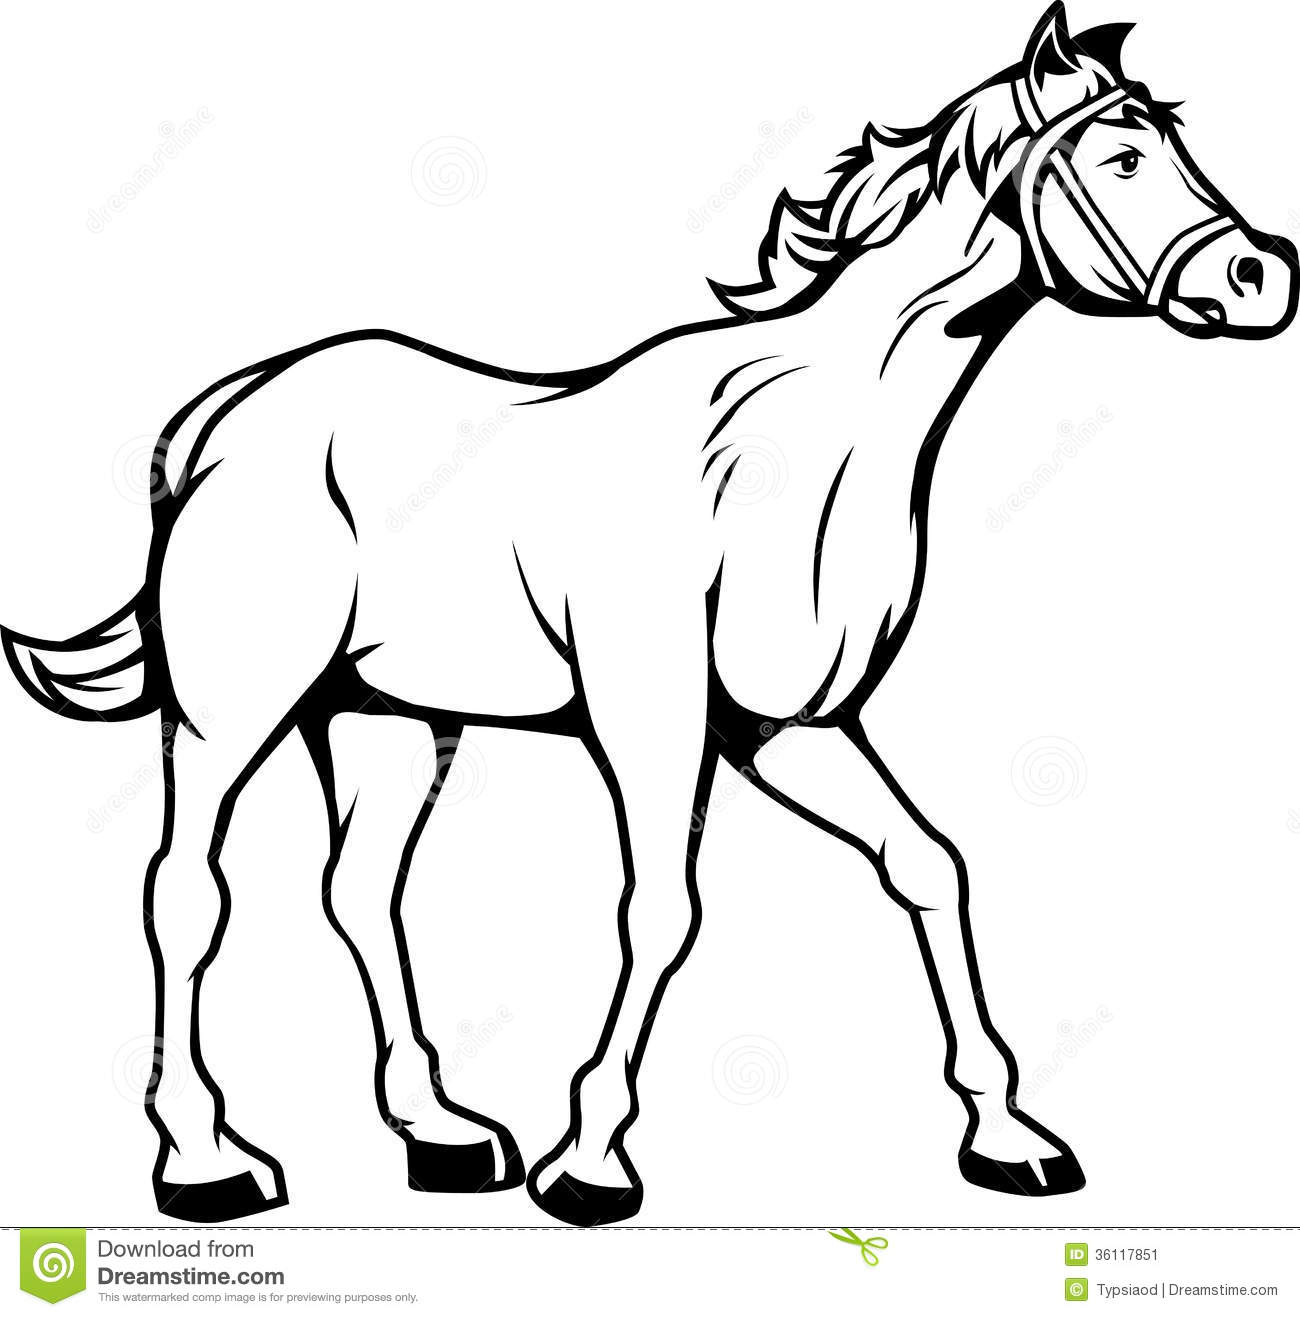 horse clipart black and white - Horse Clipart Black And White